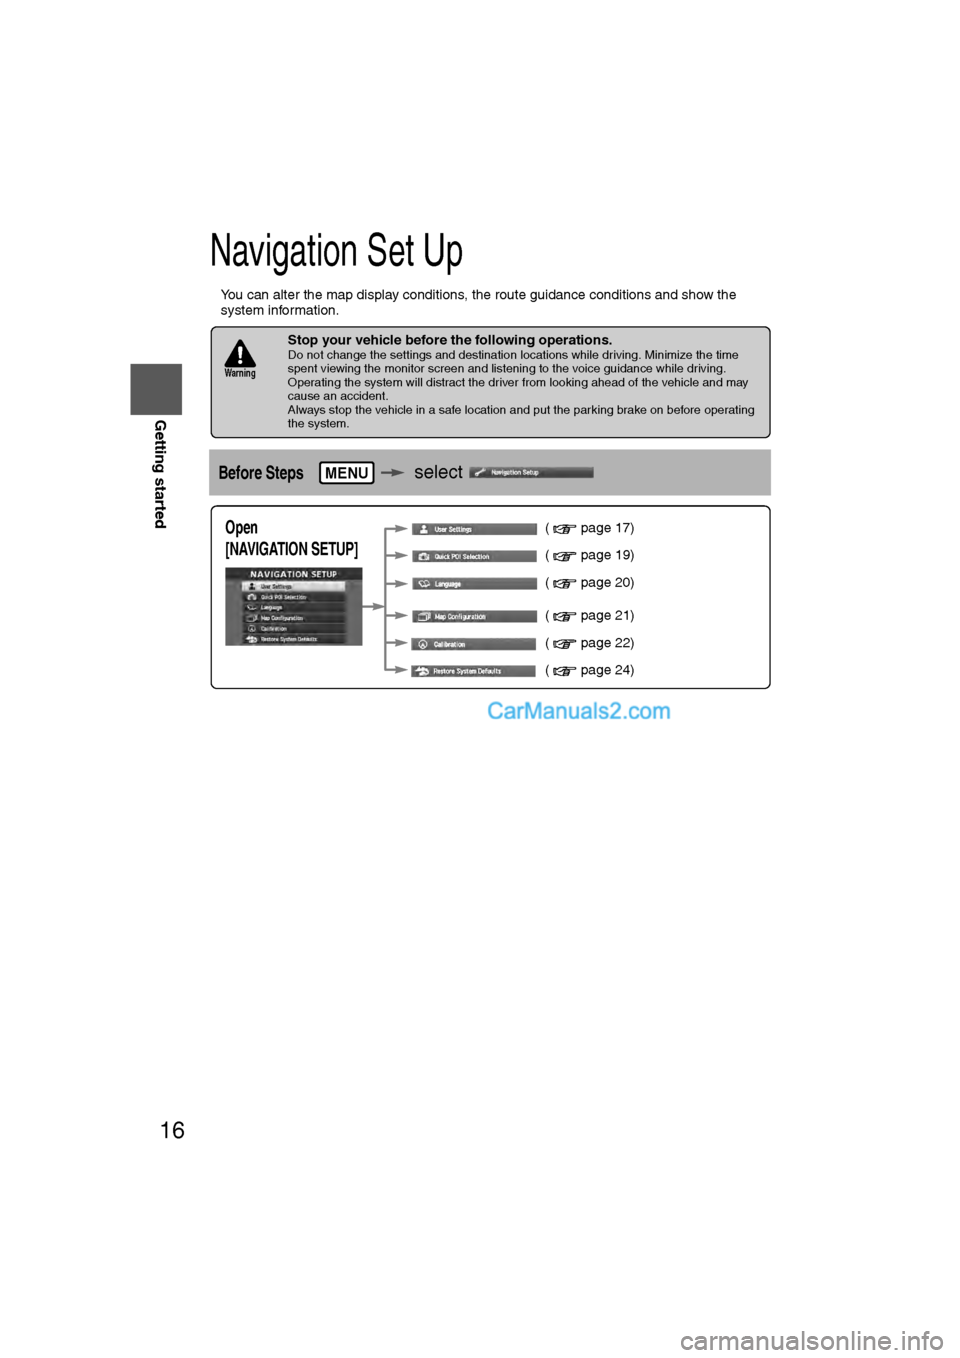 MAZDA MODEL CX-9 2009  Navigation Manual (in English) 16
RoutingAddress 
Book
Getting started
Navigation Set Up
l
You can alter the map display conditions, the route guidance conditions and show the 
system information.
nStop your vehicle before the foll